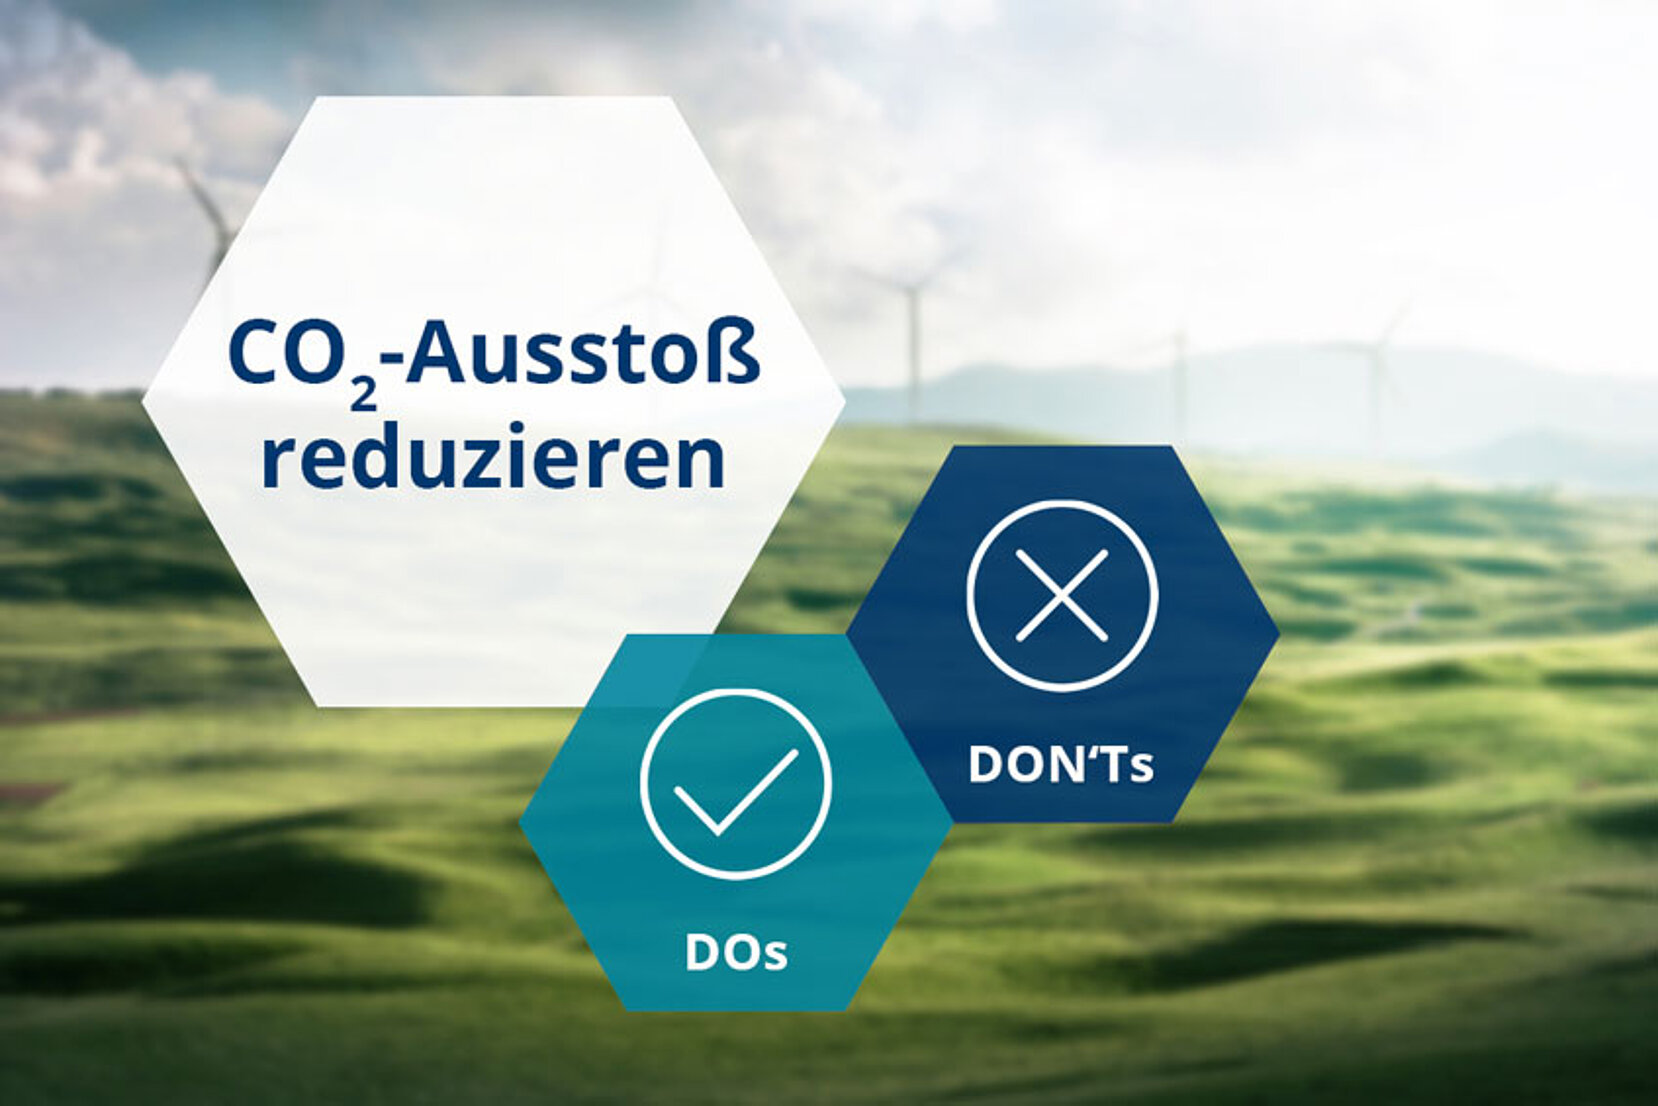 CO2 Ausstoß reduzieren - Dos and Don'ts